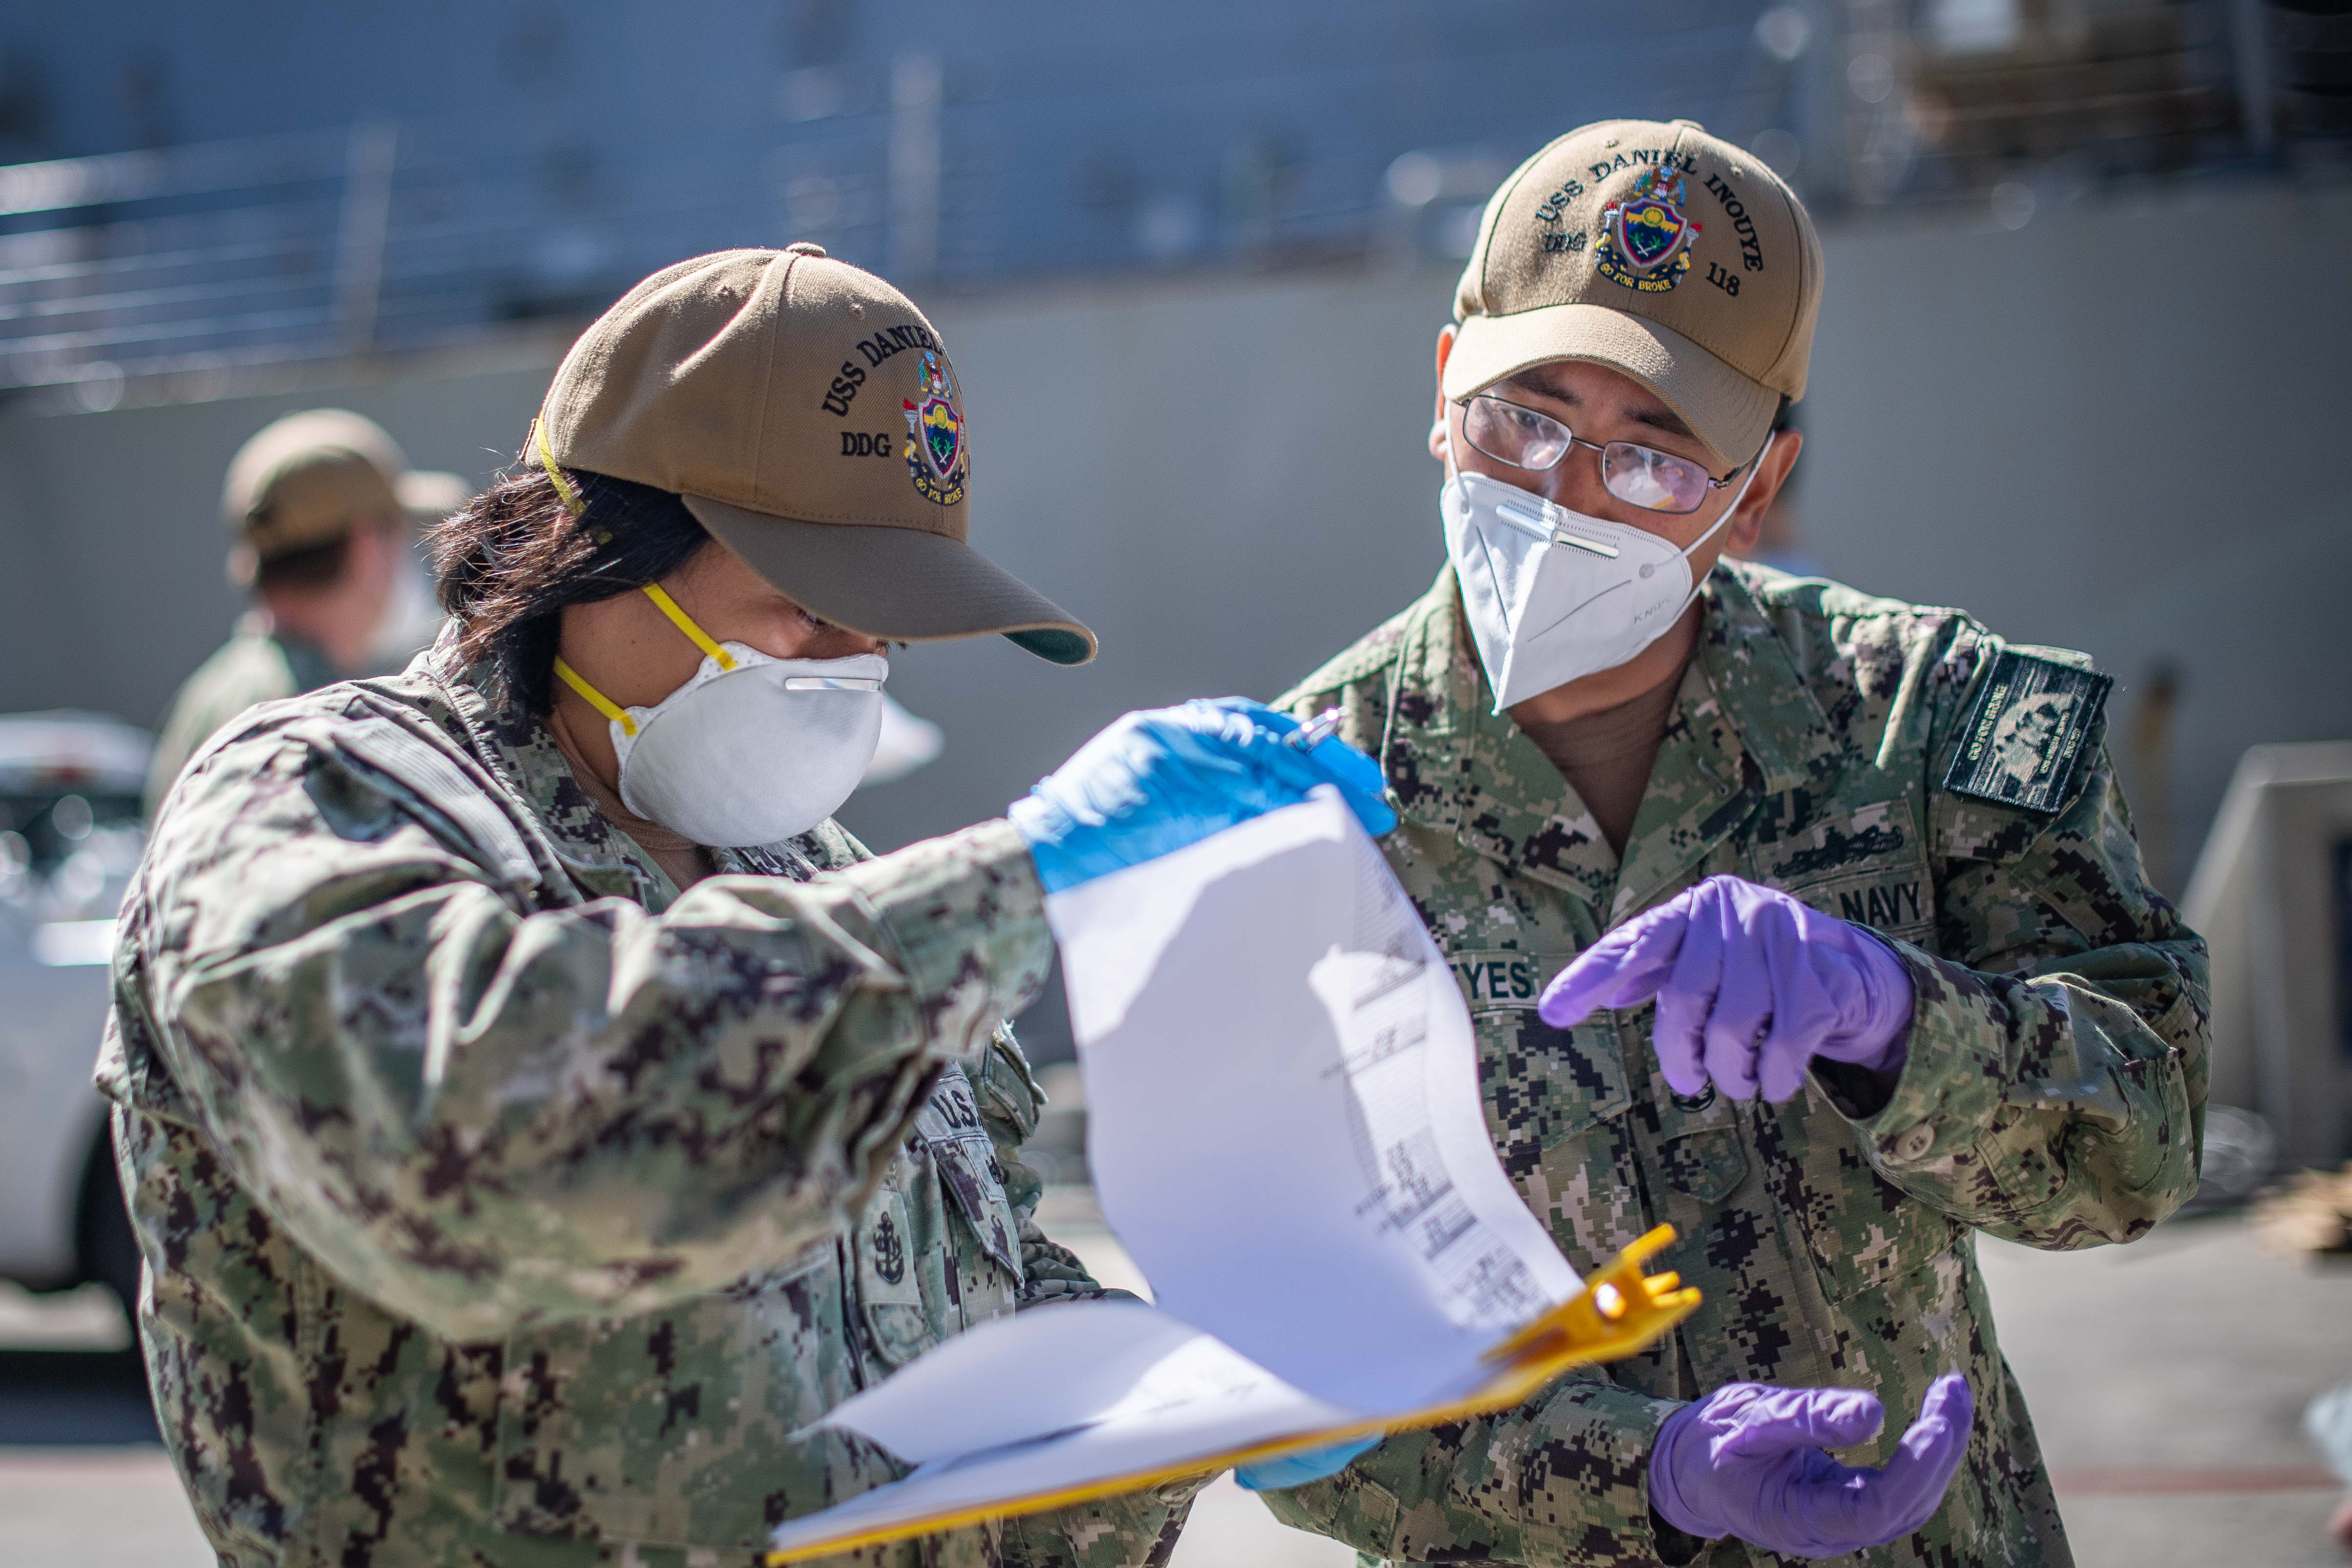 Chief Cryptologic Technician Marisol Swenney, left, and Chief Fire Controlman Roland Reyes, both assigned to the future guided-missile destroyer USS Daniel Inouye, review a muster sheet during crew swap, the next phase of recovery for USS Kidd. The Navy re-tested the crew for COVID-19 and transferred nearly 90 confirmed healthy sailors from quarantine to the ship to replace the caretaker crew that has been aboard since the ship arrived in San Diego on April 28. The new caretaker crew will continue the strategic deep-cleaning regimen and provide essential services for the ship. (U.S. Navy photo by Mass Communication Specialist 2nd Class Alex Corona)